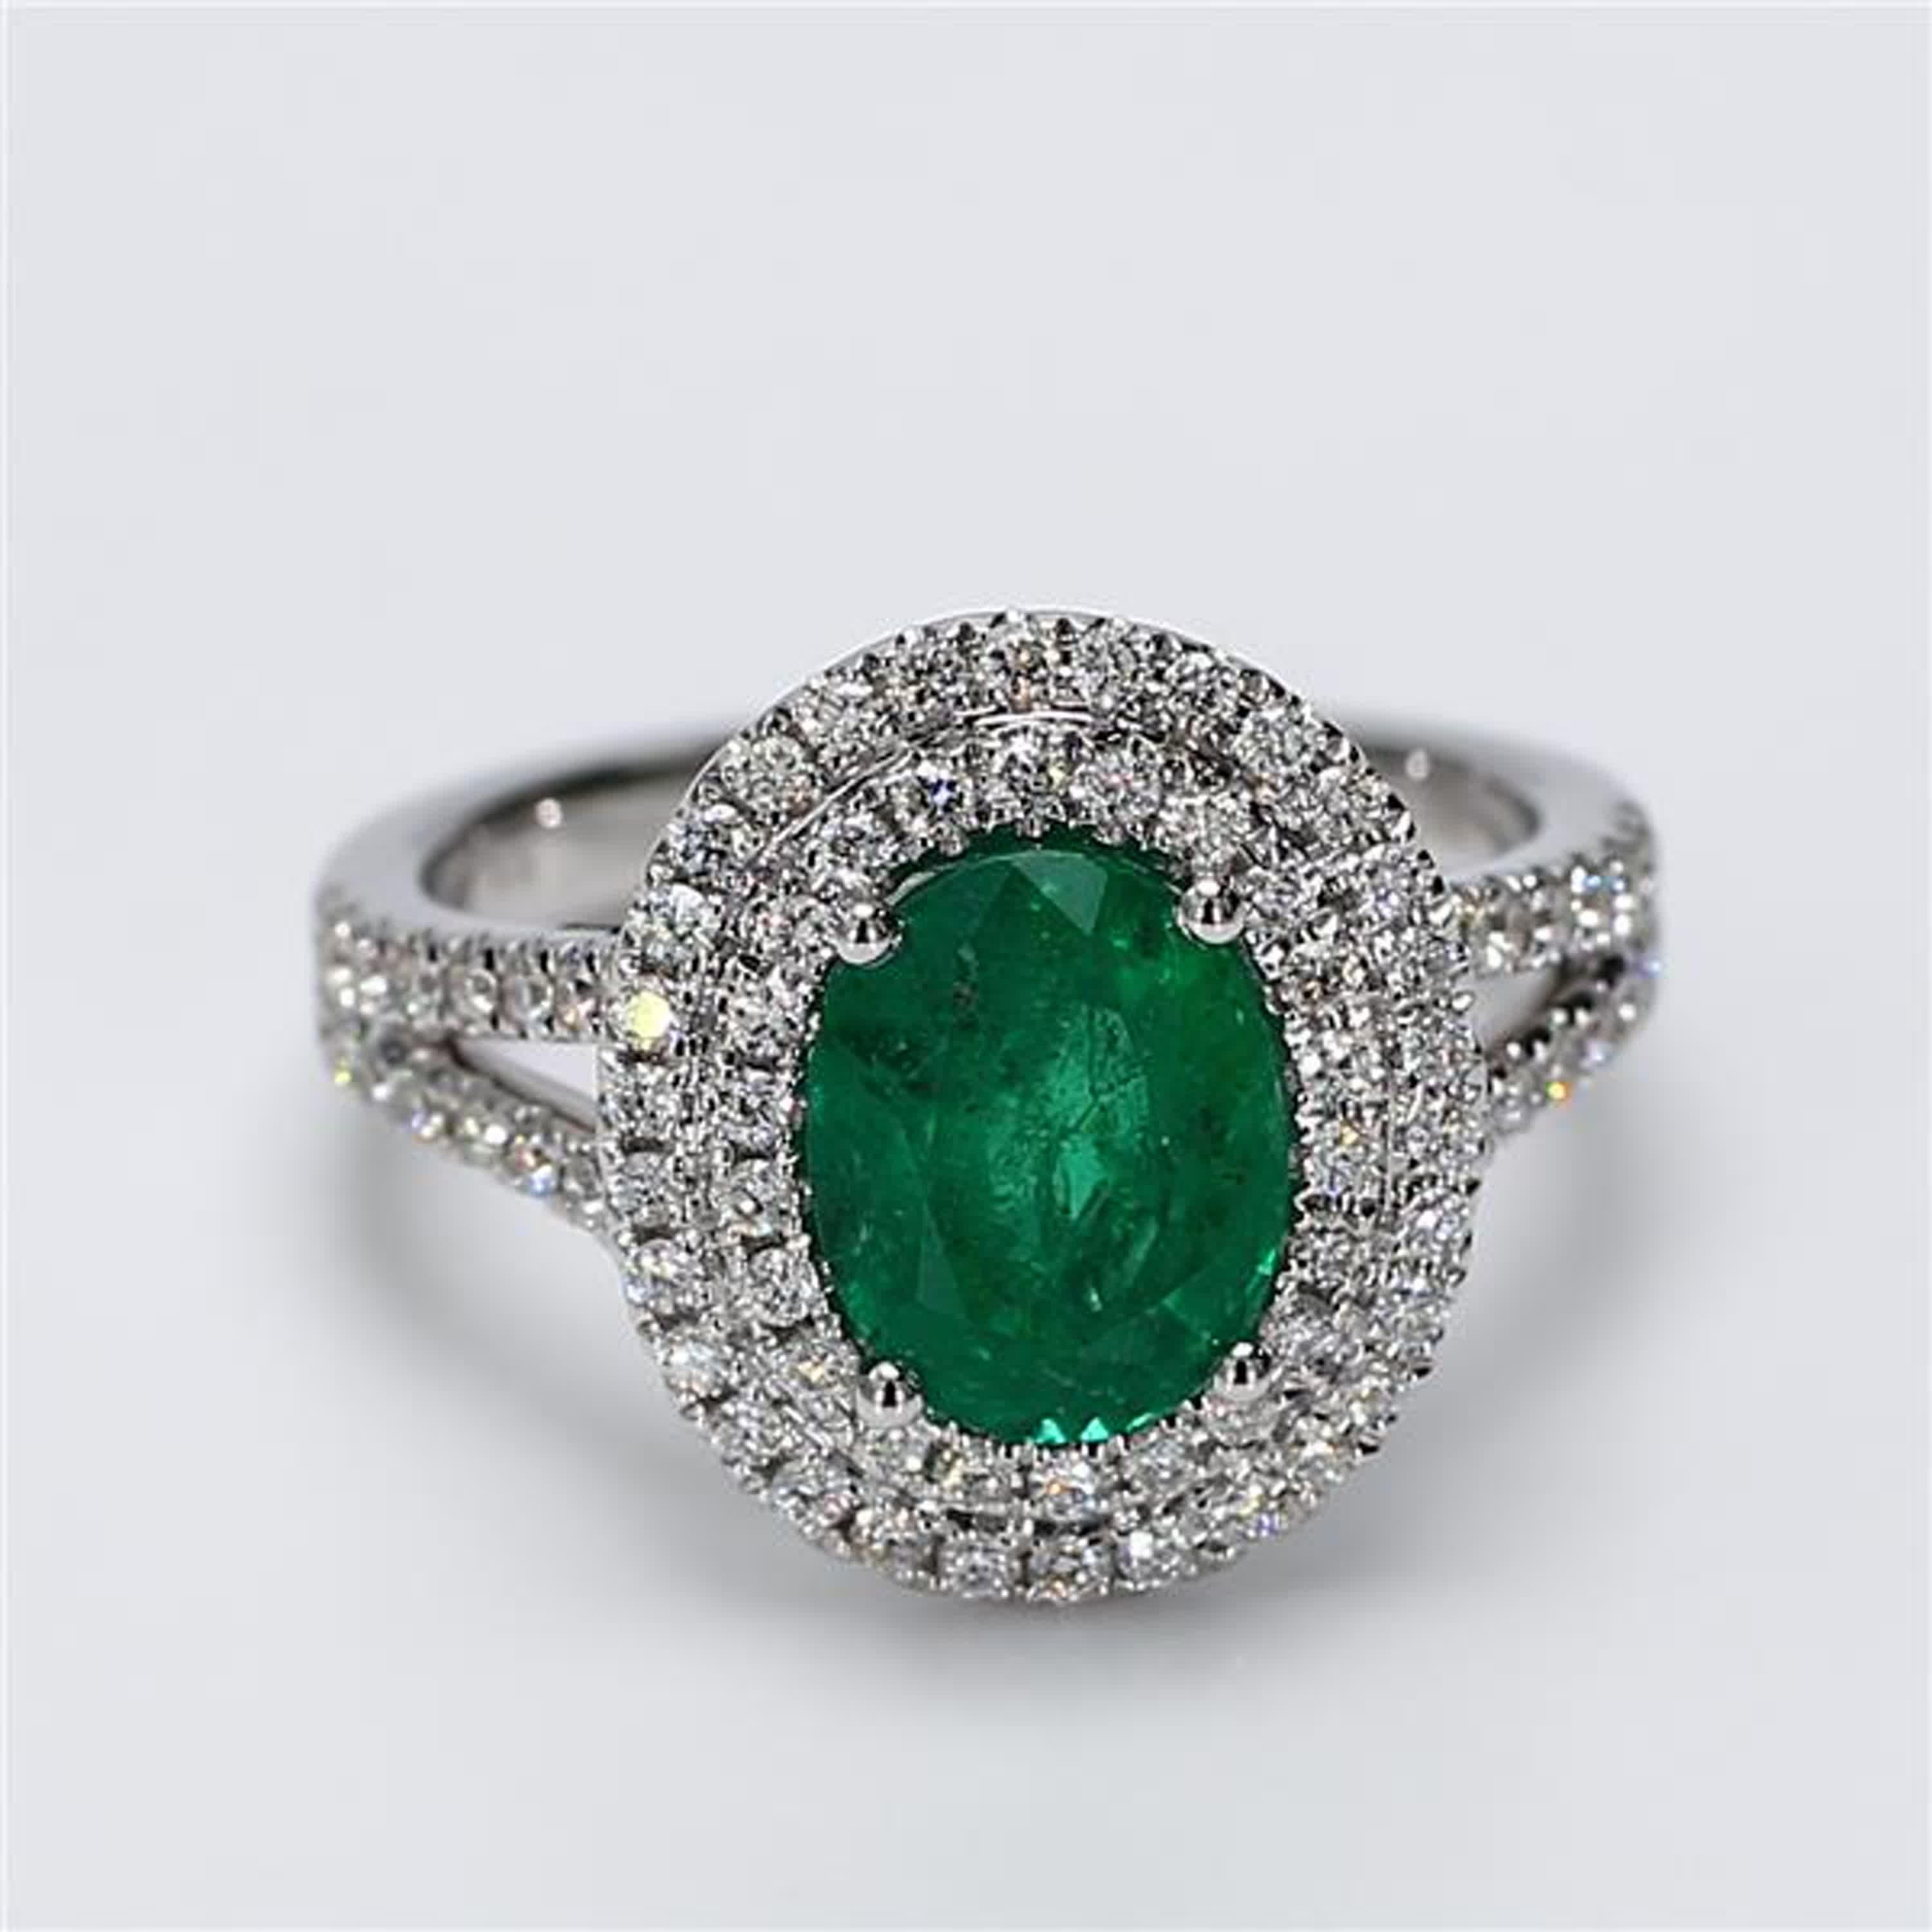 RareGemWorld's classic emerald ring. Mounted in a beautiful 18K White Gold setting with a natural oval cut emerald. The emerald is surrounded by natural round white diamond melee. This ring is guaranteed to impress and enhance your personal